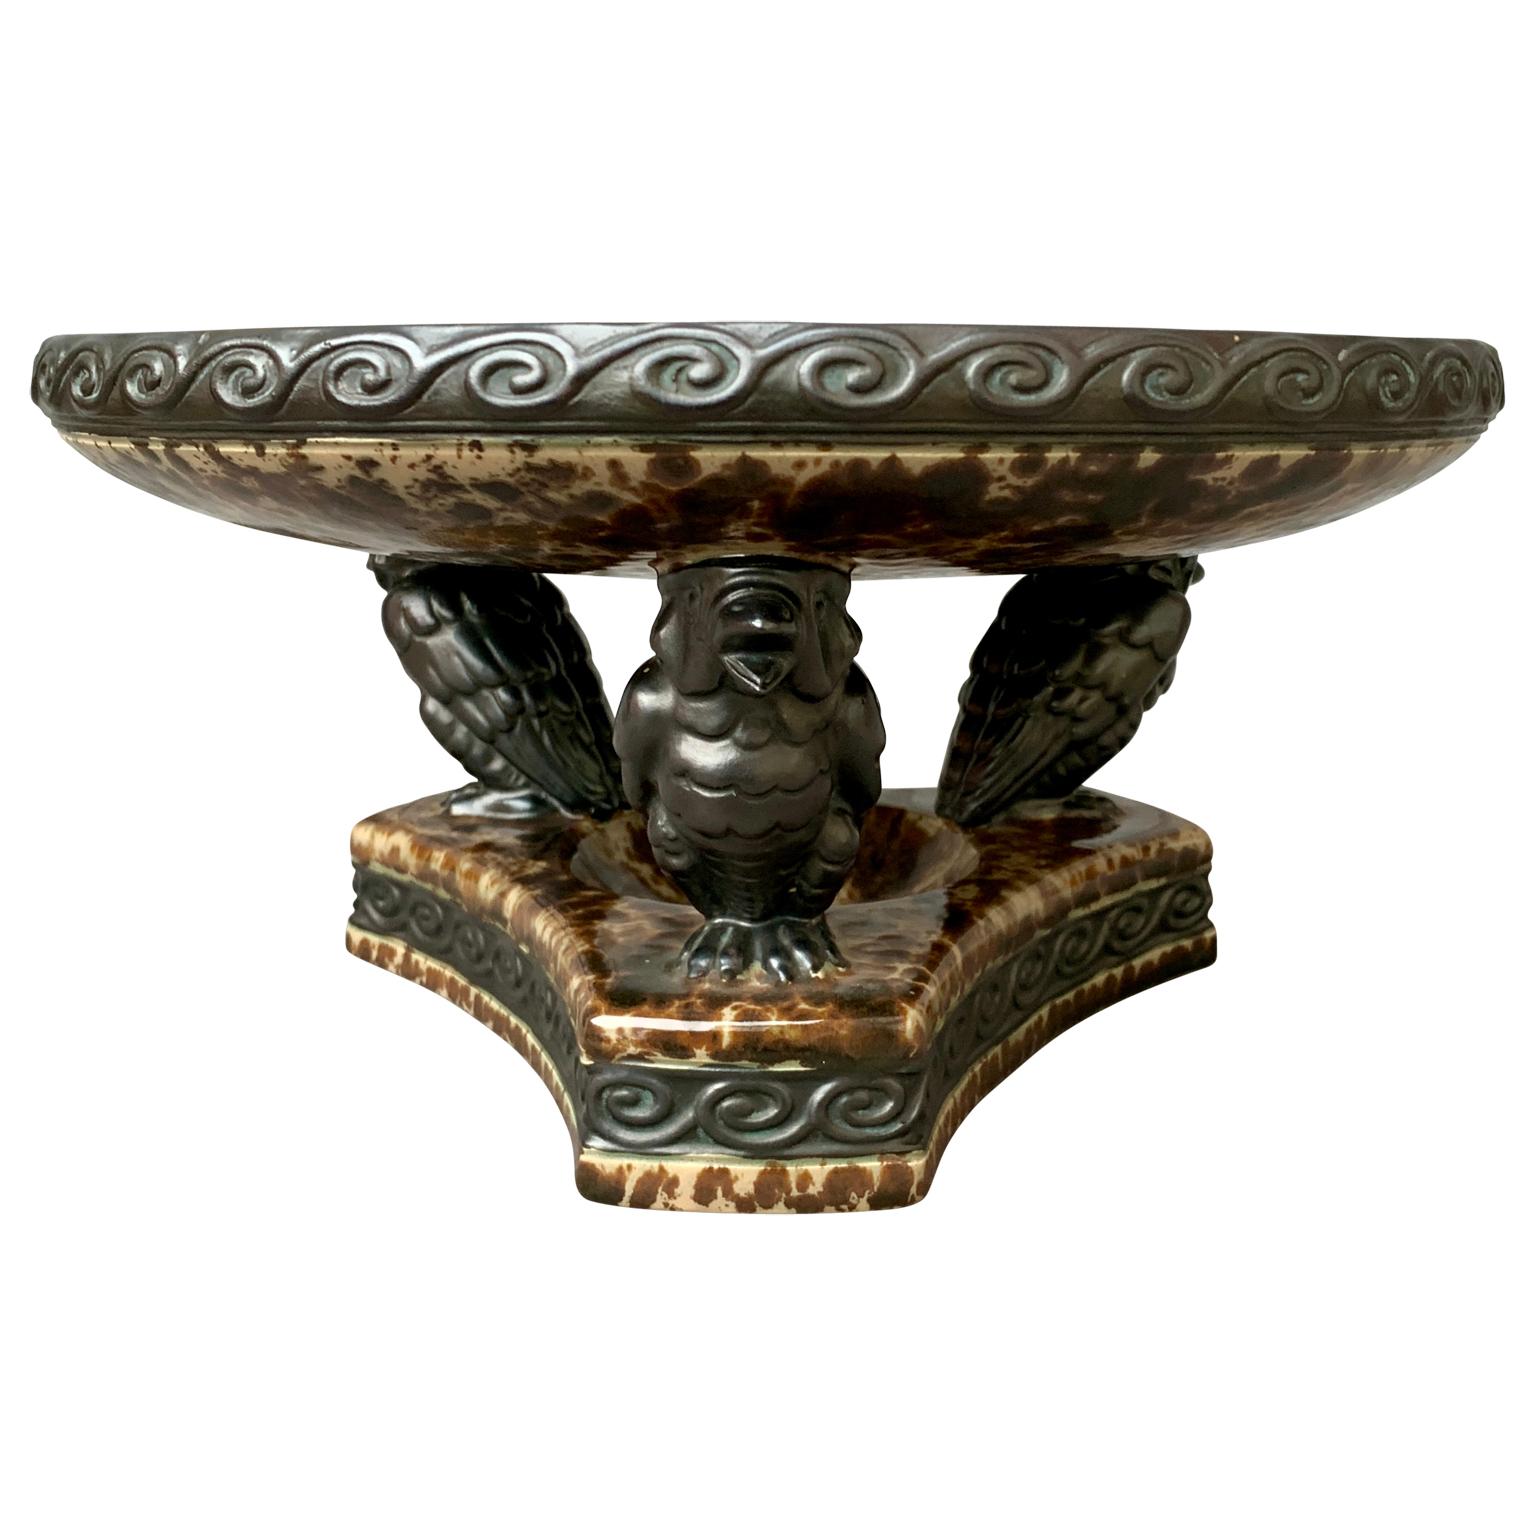 Amazing in design and execution, this Art Deco compote features three charming birds supporting a polychromed fruit bowl or sculpture. This bowl, acquired in a collectors home in Belgium, makes an impressive centerpiece on any formal or informal